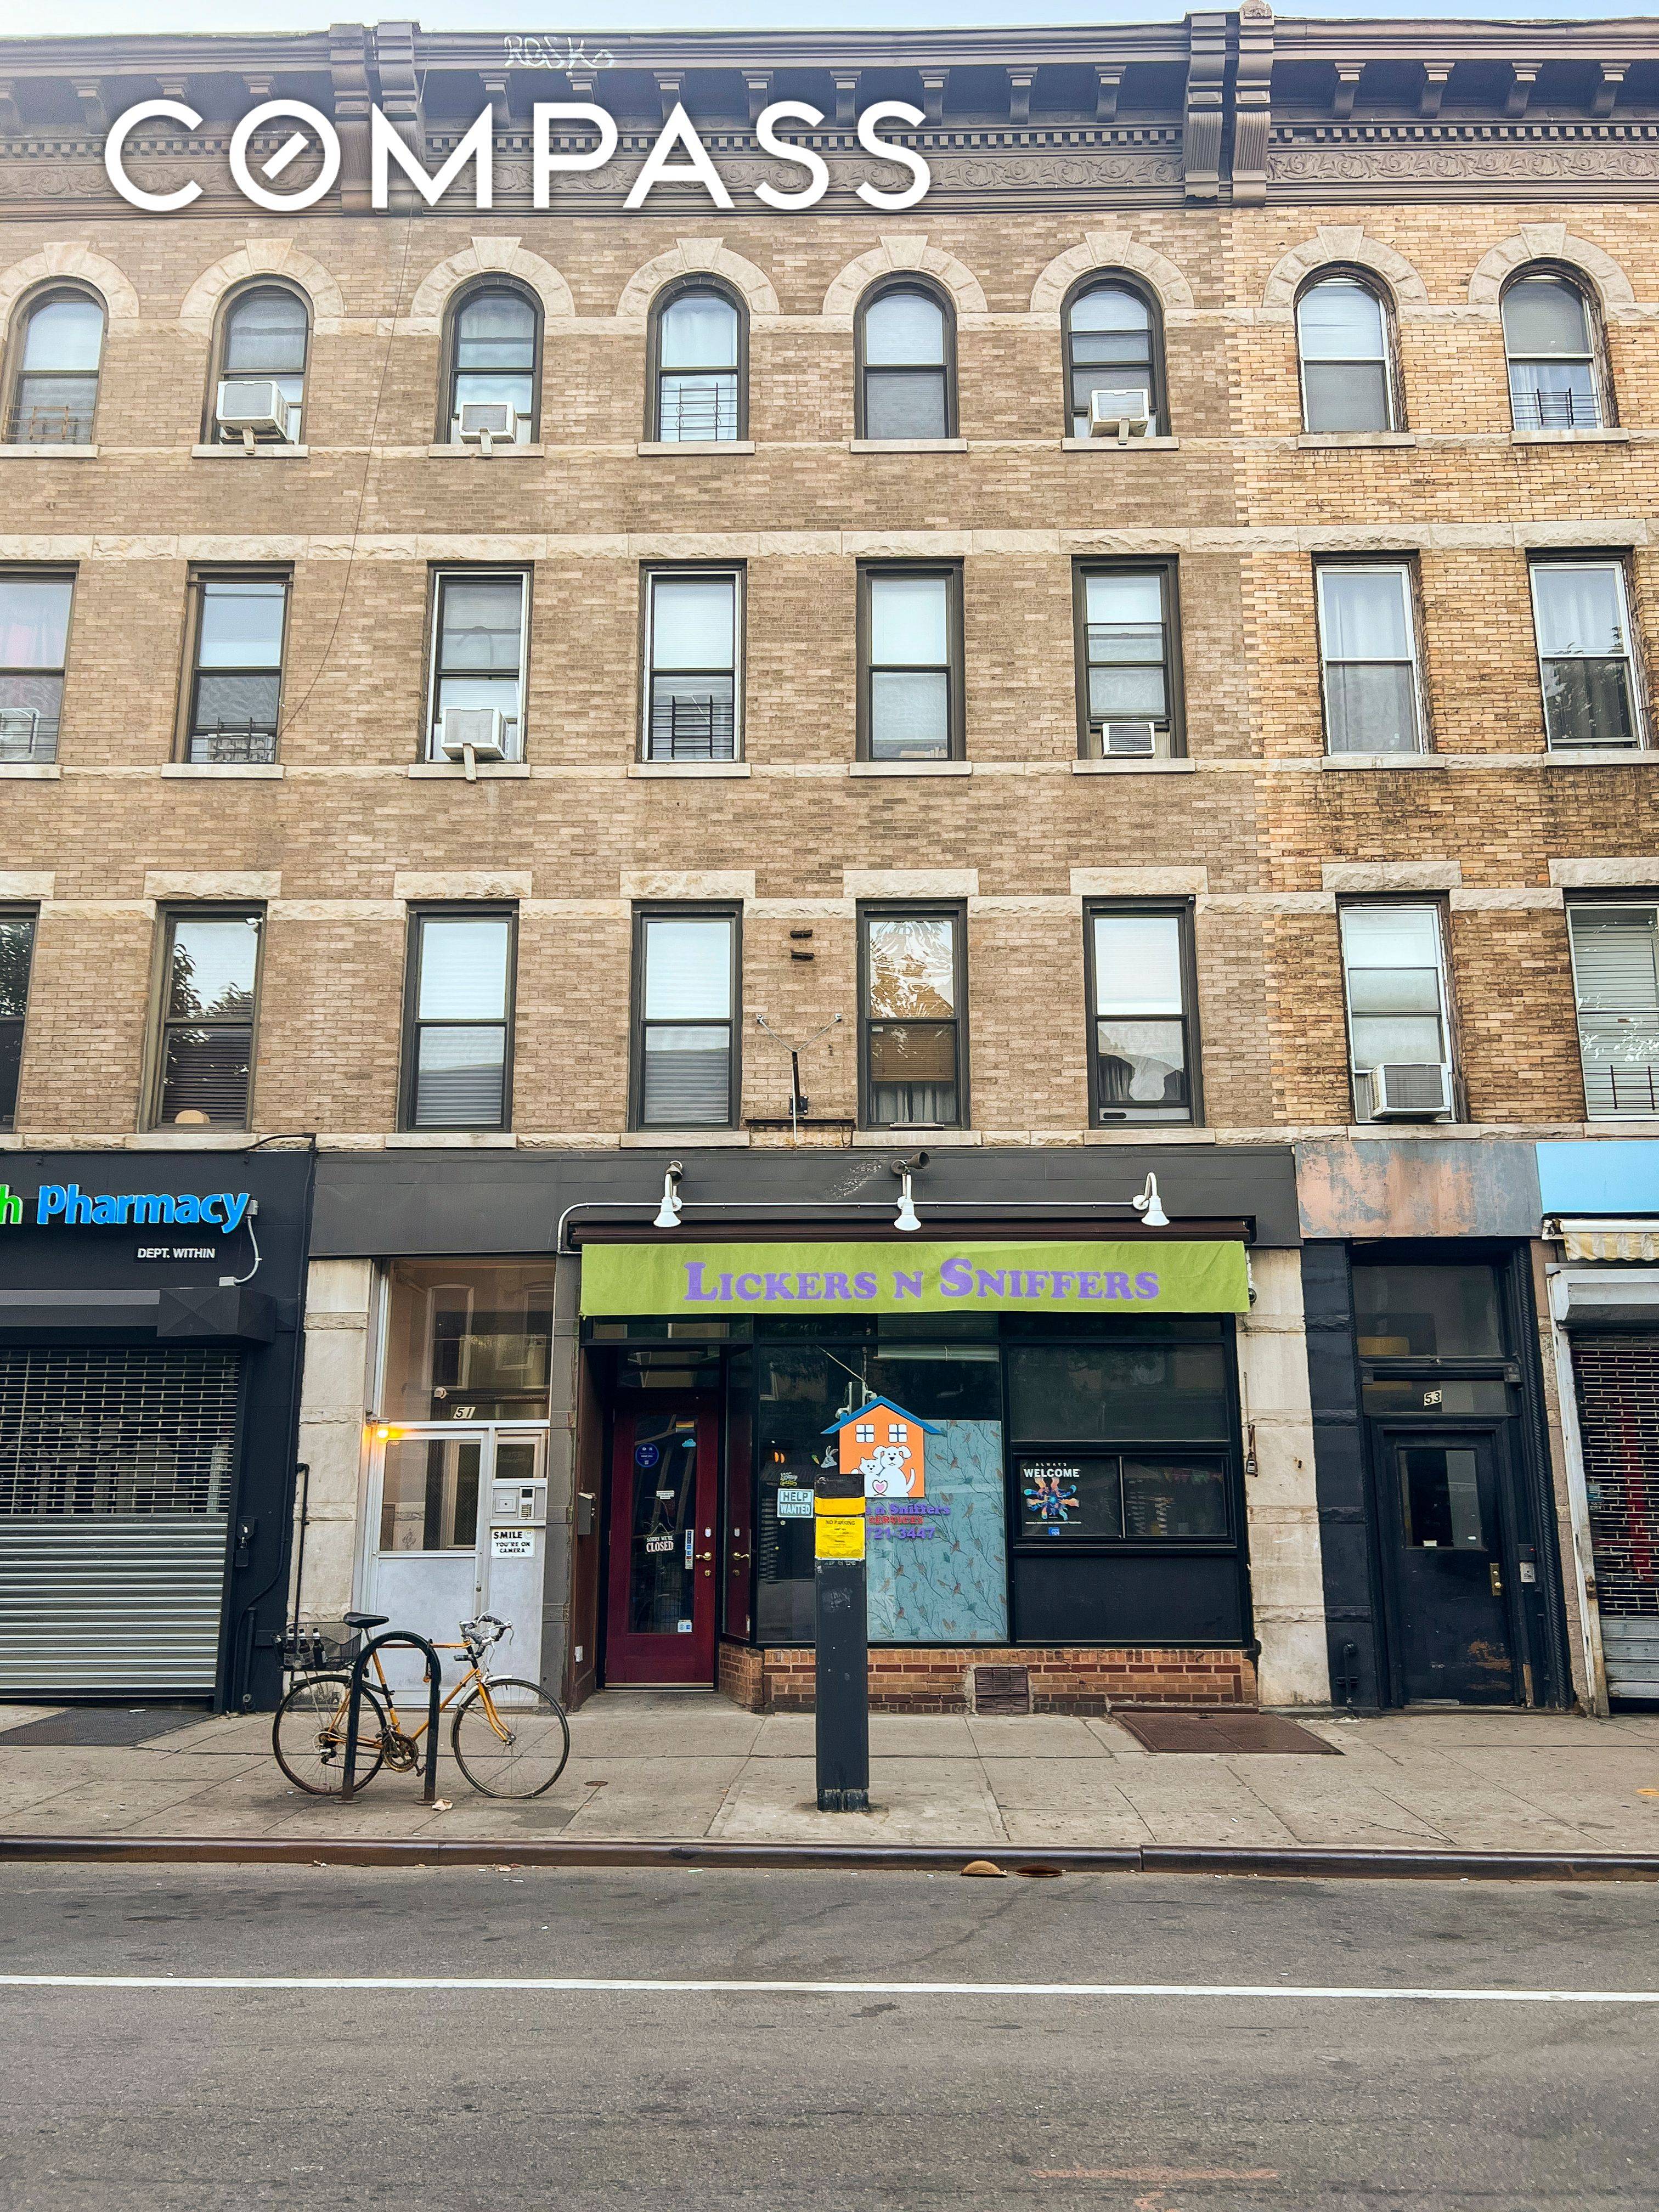 Price reduced ! Great opportunity with this mixed use building in prime North Park Slope neighborhood.